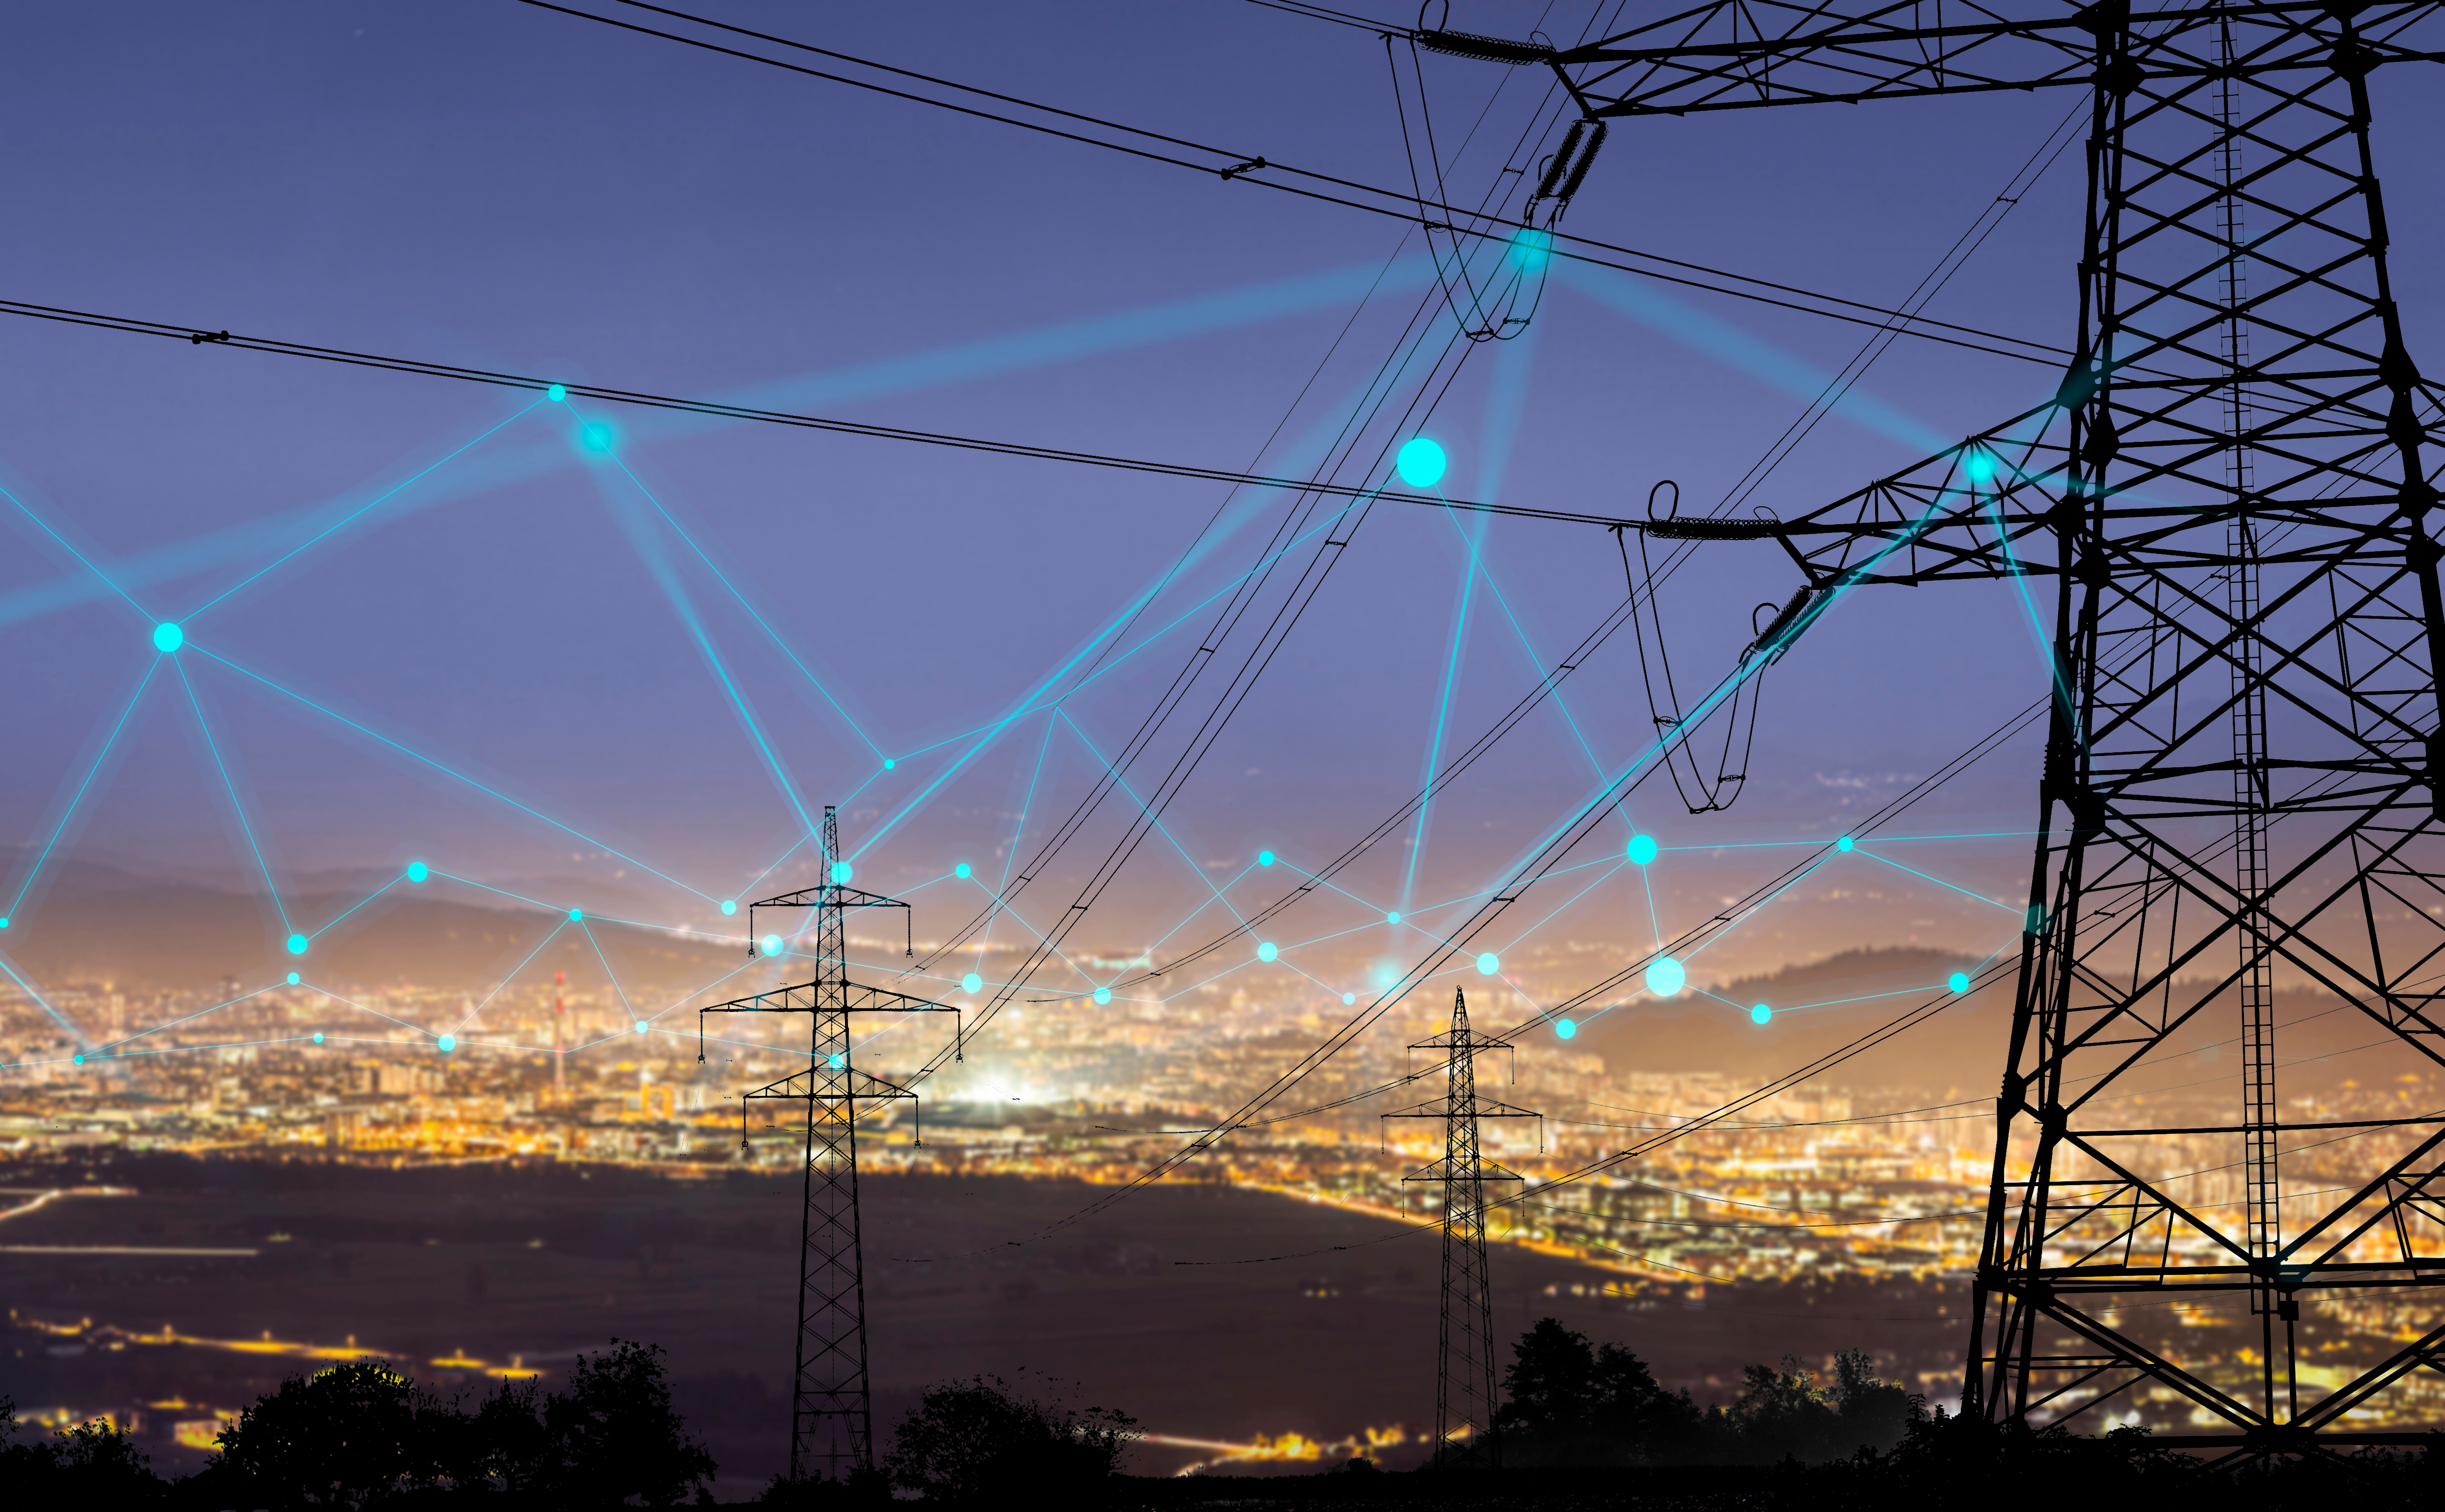 representation of an electrical smart grid as dots and lines connecting transmissions poles to a city at night